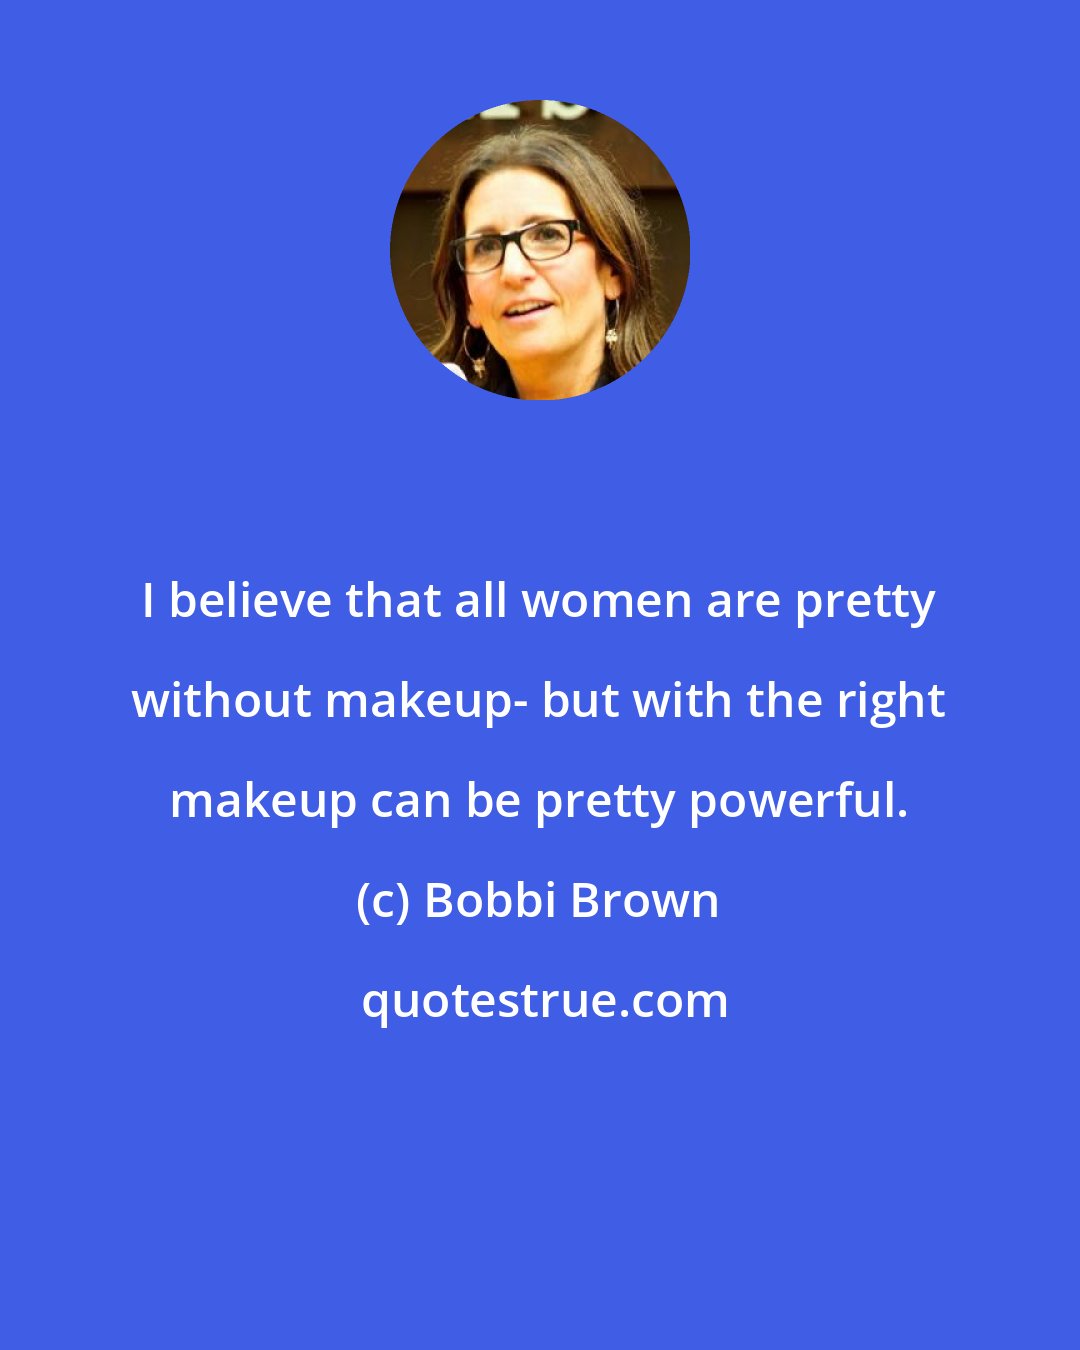 Bobbi Brown: I believe that all women are pretty without makeup- but with the right makeup can be pretty powerful.